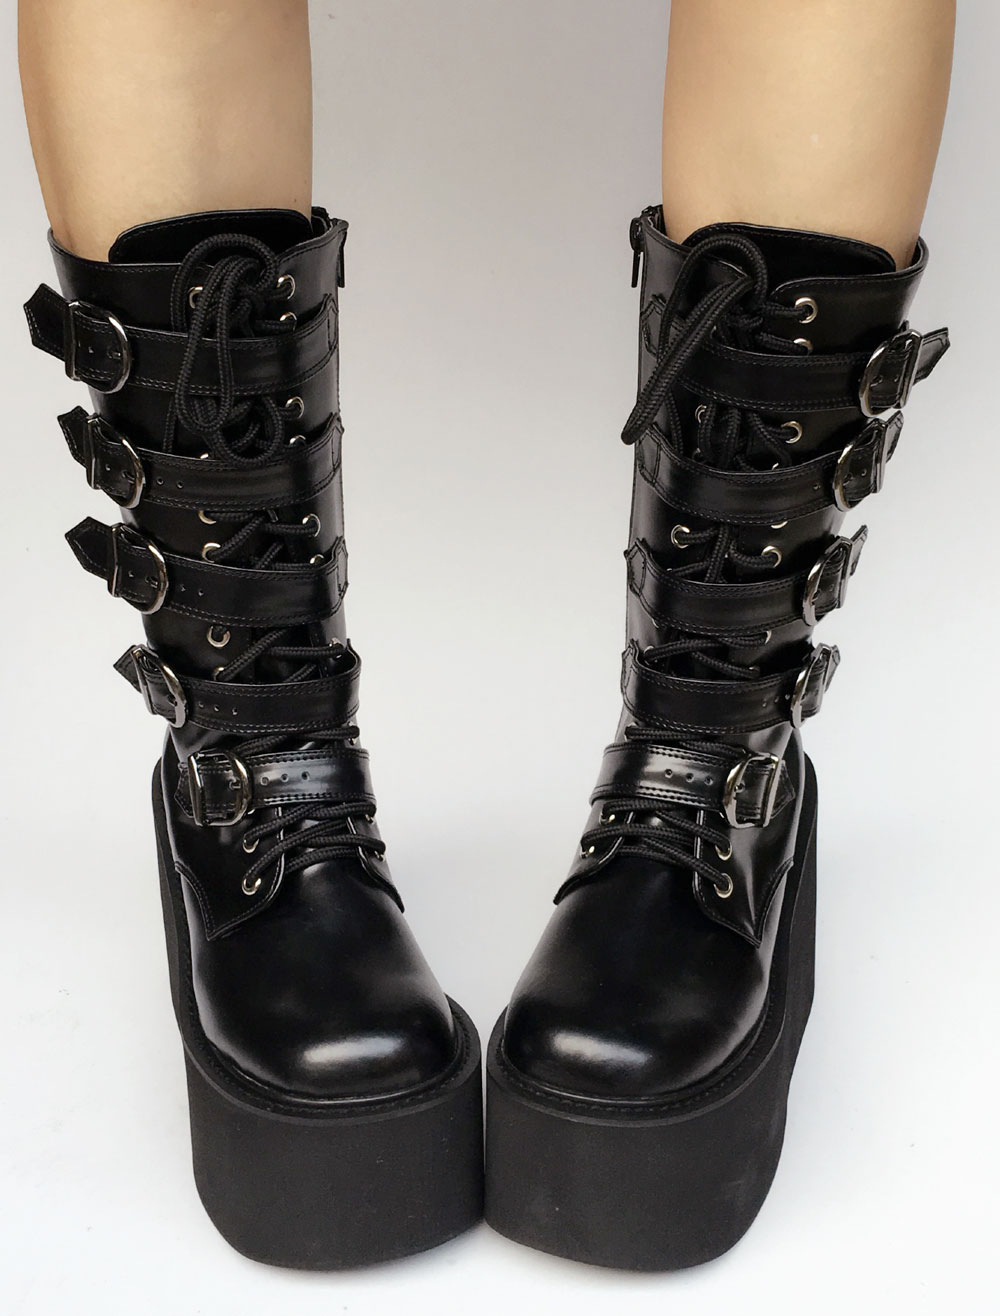 black platform boots with buckles